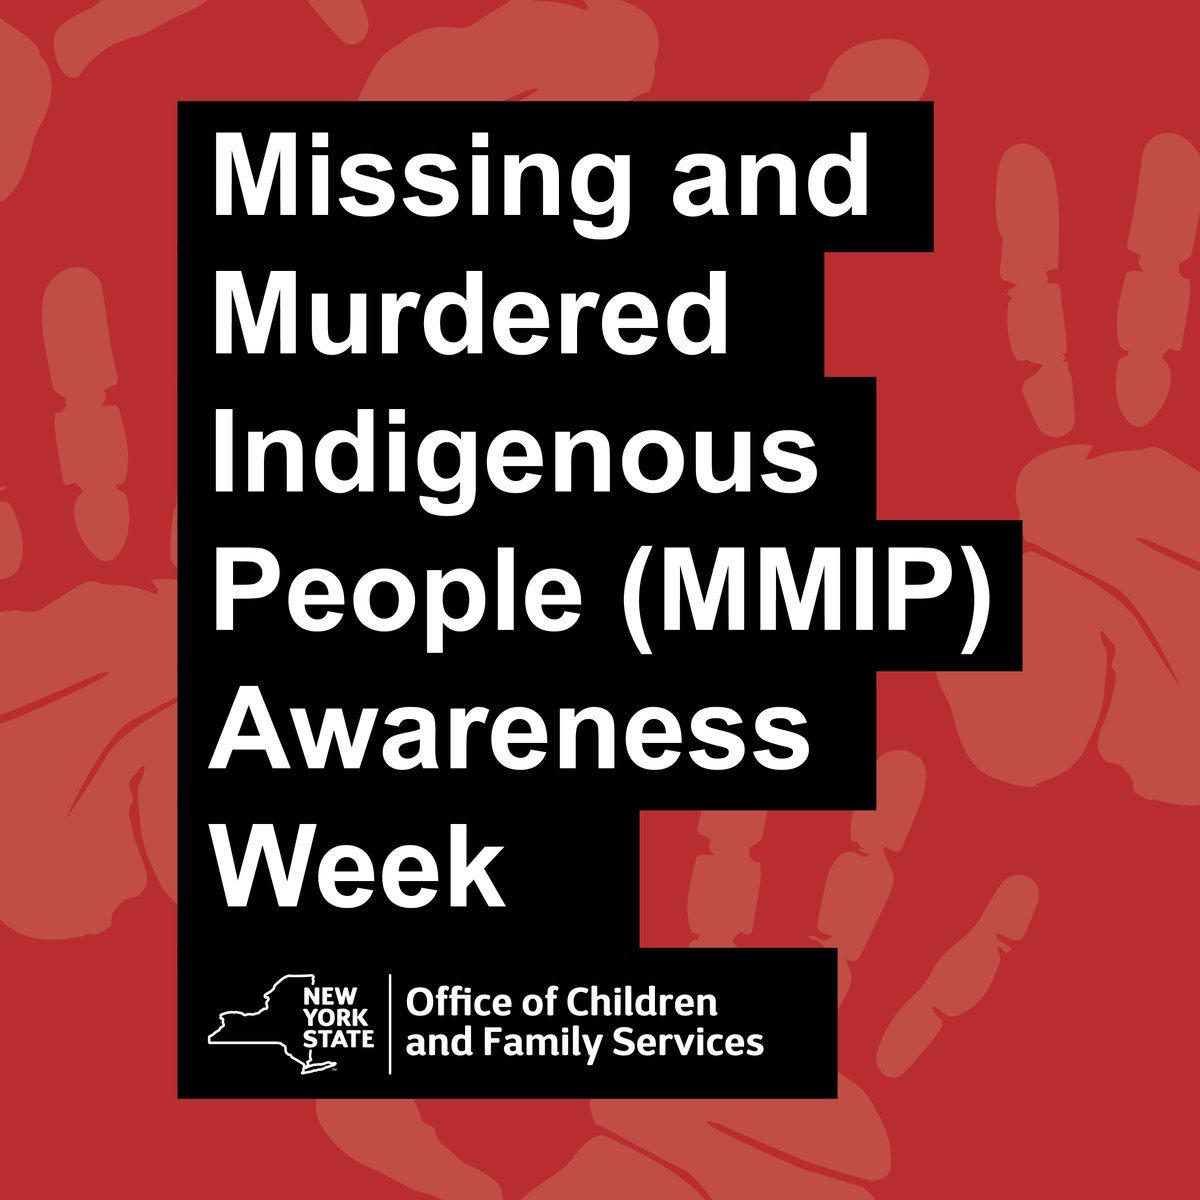 Did you know Native American and Alaska Native rates of murder, rape and violent crime are all higher than the national averages? Our agency’s employees are wearing red and #NYS landmarks will be lit red tonight to raise awareness about this crisis. #MMIP